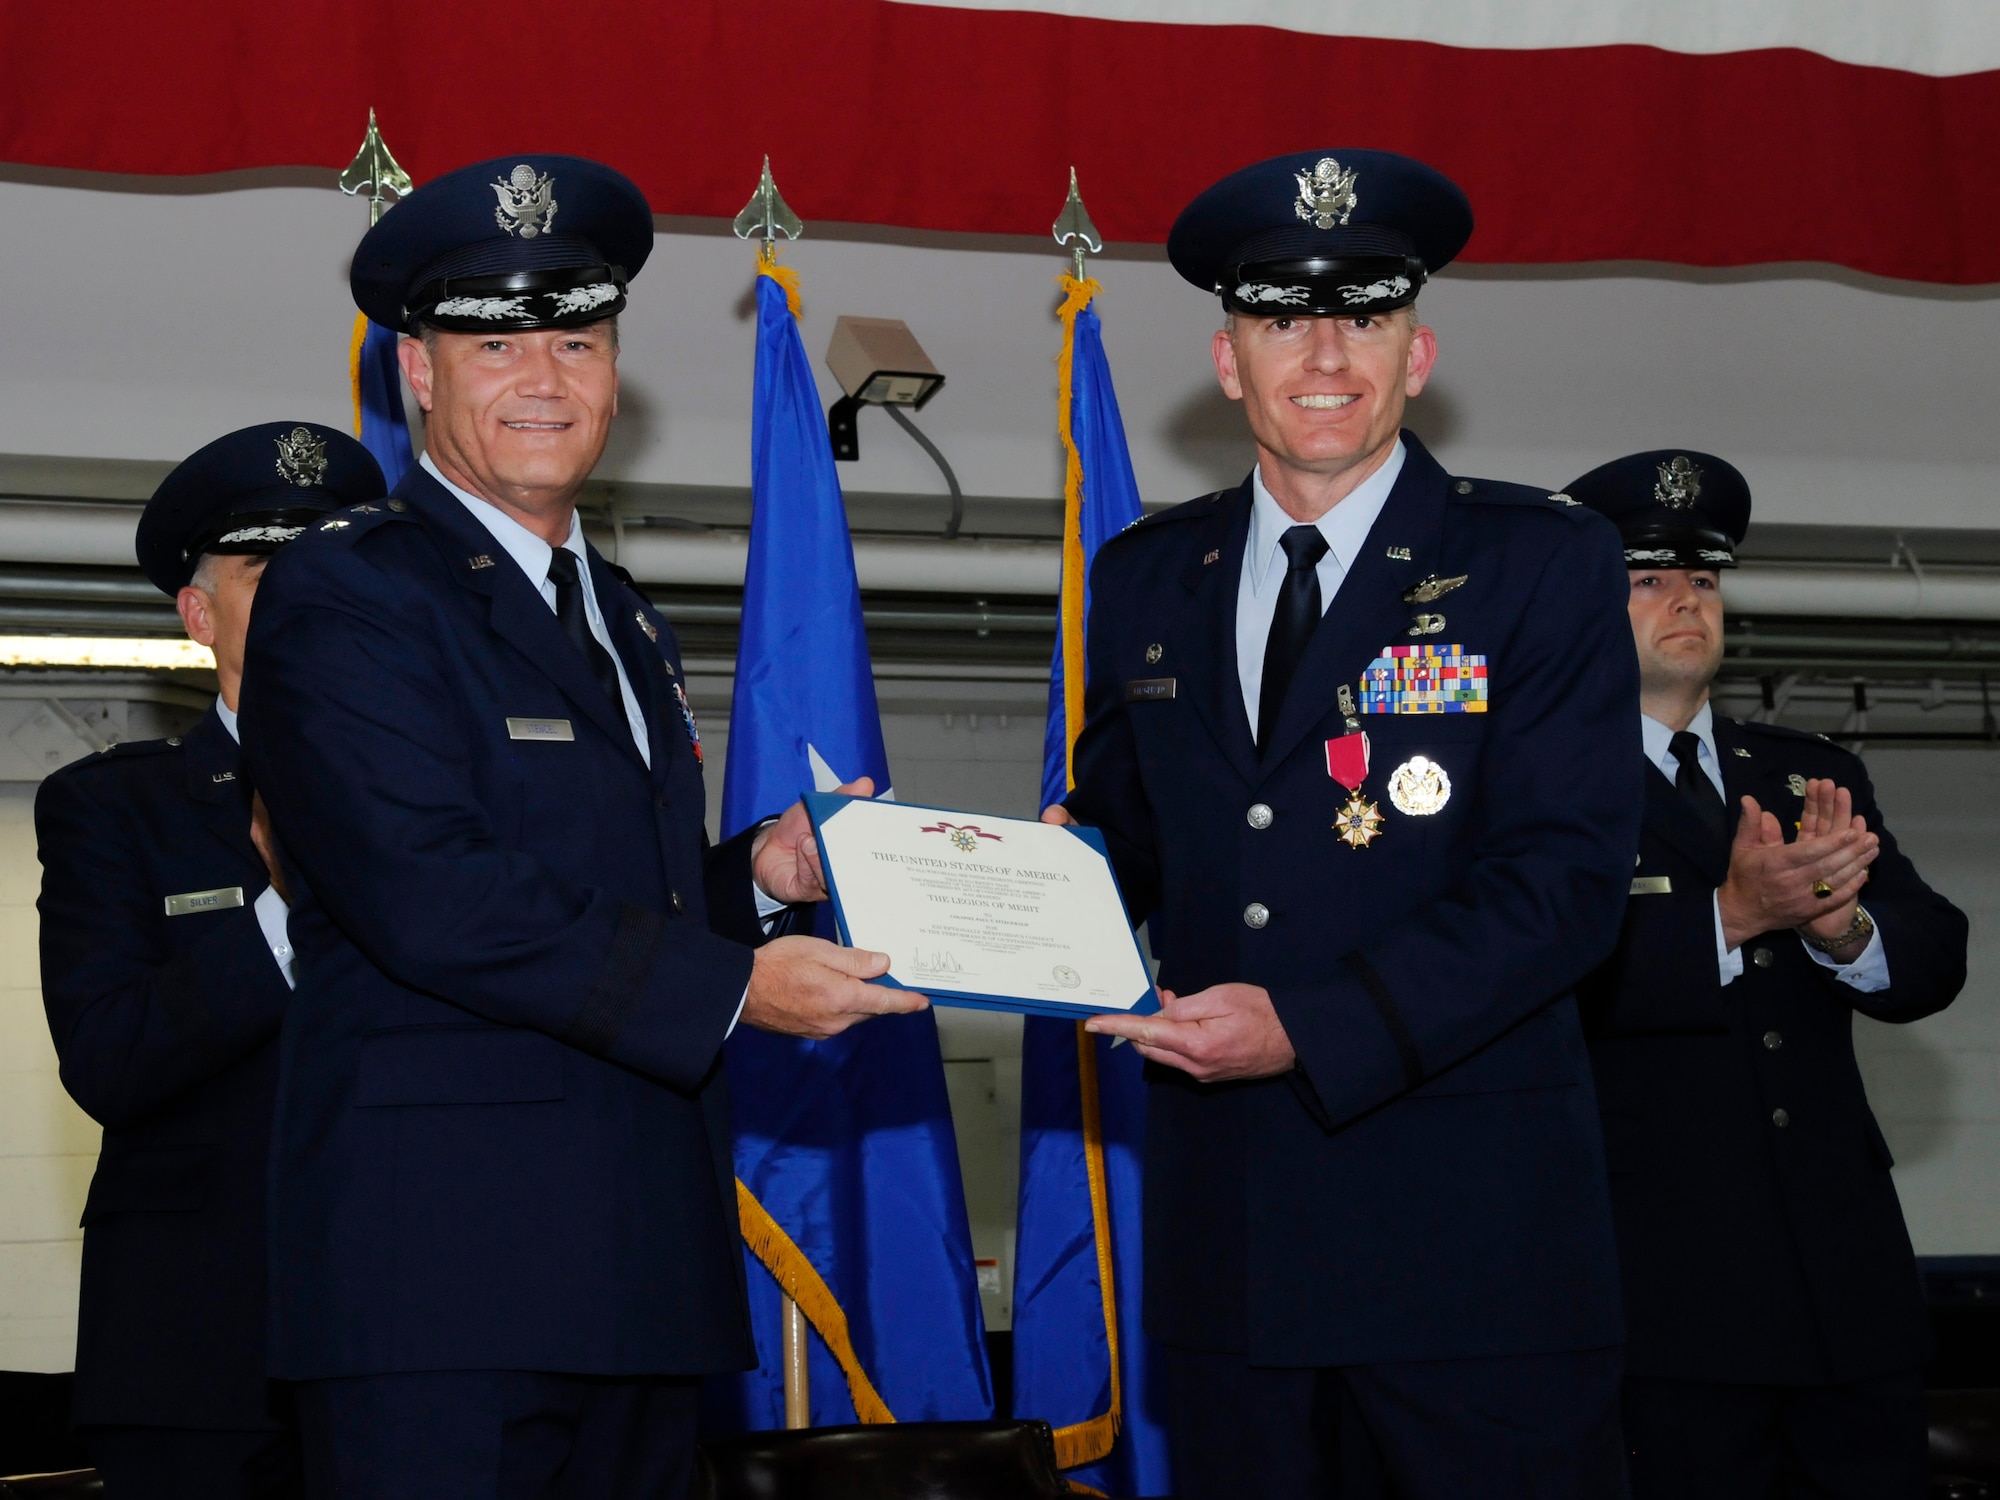 U.S. Air Force Brig. Gen. Michael E. Stencel, The Adjutant General of Oregon, left, presents The Legion of Merit certificate to Col. Paul T. Fitzgerald, the outgoing 142nd Fighter Wing commander, right, during the 142nd Fighter Wing change of command ceremony, Portland Air National Guard Base, Ore., Nov. 6, 2016. (U.S. Air National Guard photo by Tech. Sgt. John Hughel, 142nd Fighter Wing Public Affairs) 